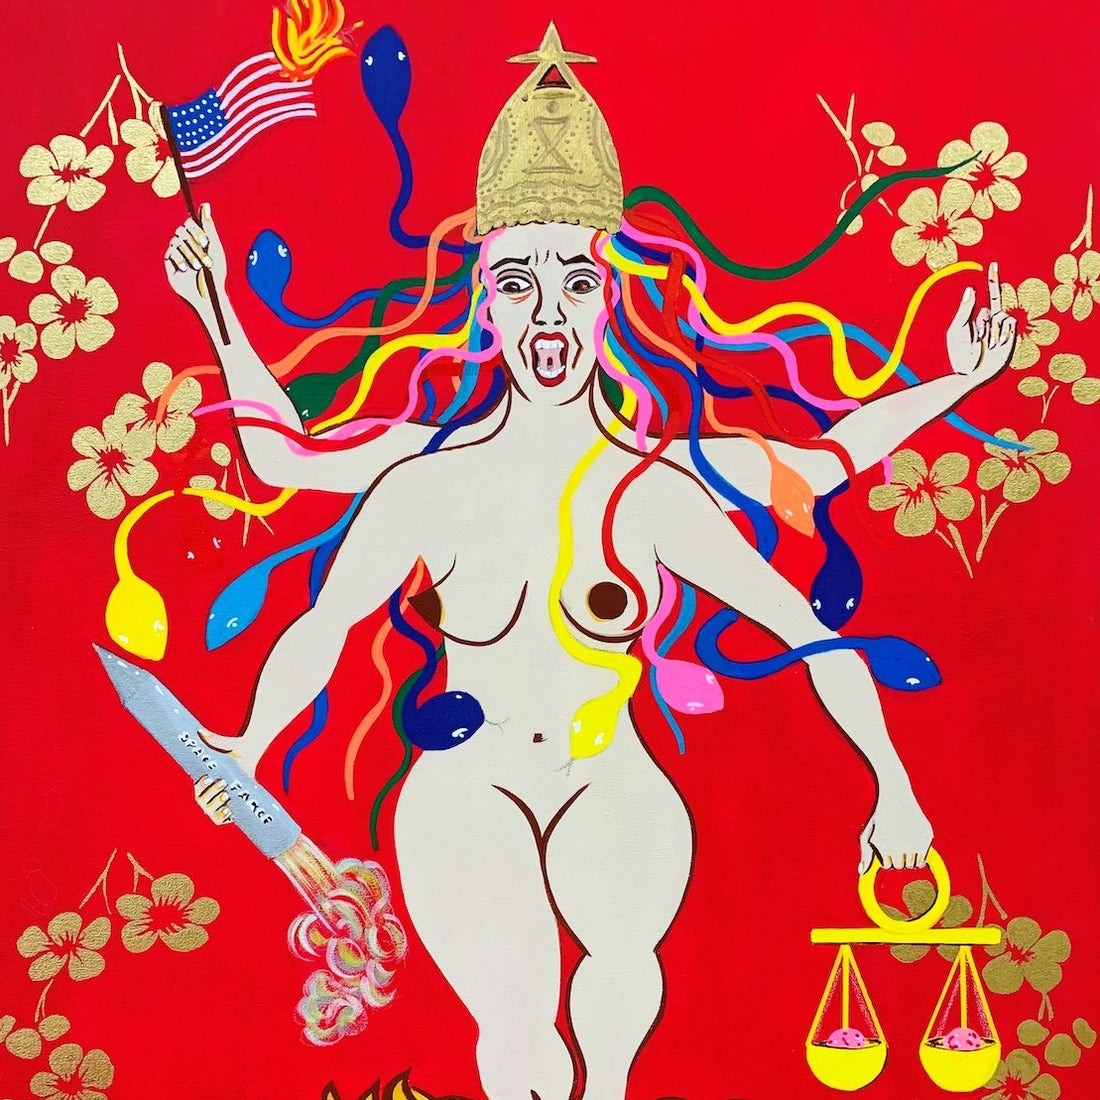 Depiction of Kali, warrior woman on bright red back ground. Gold leaf flowers and lion head and snakes and political content by Shima Star of Seattle 